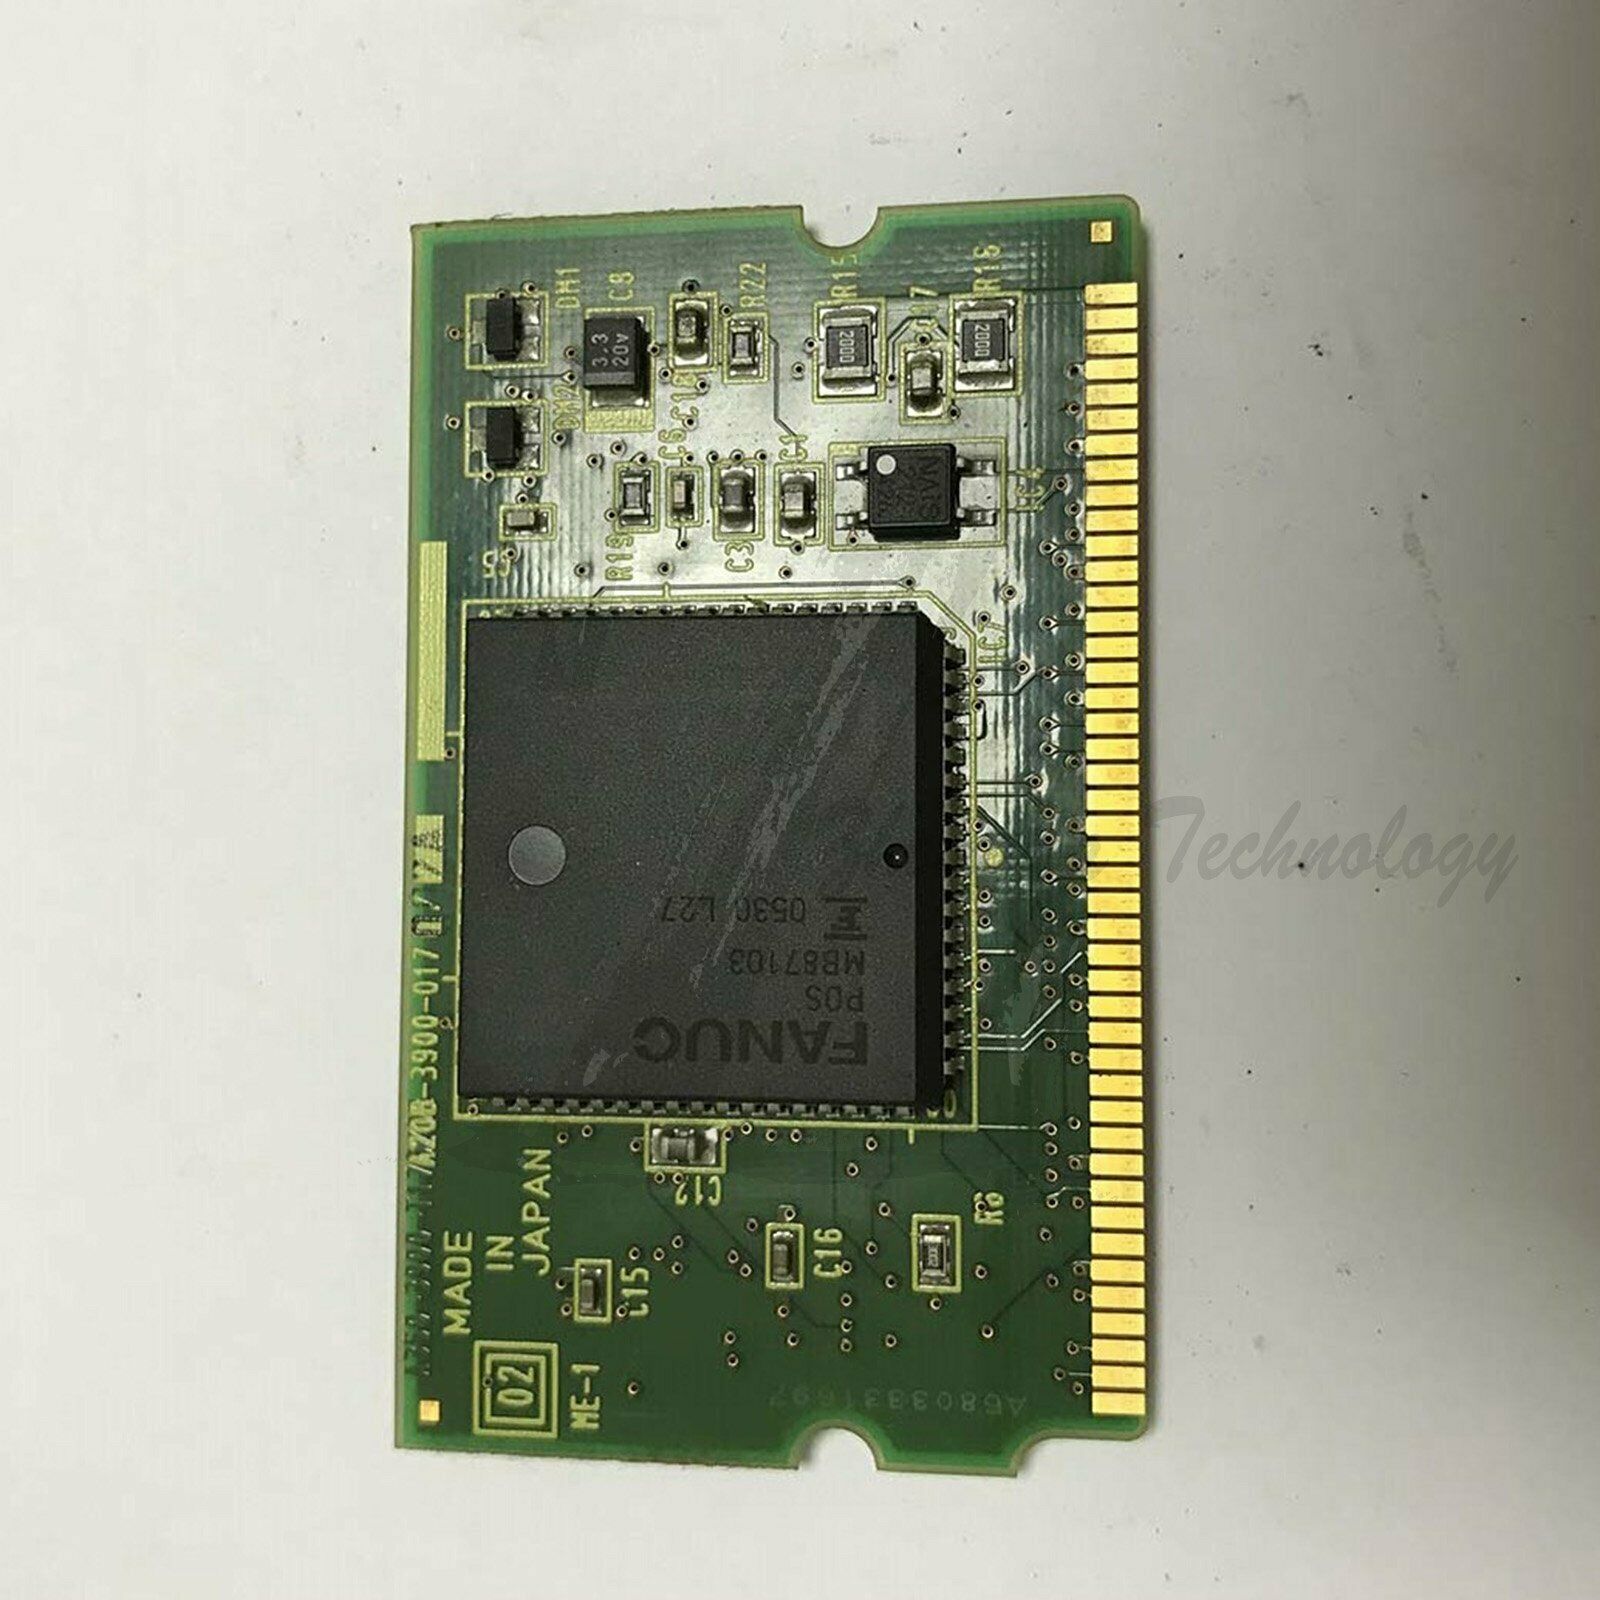 Used 1PCS FANUC A20B-3900-0170 Circuit board Tested It In Good Condition